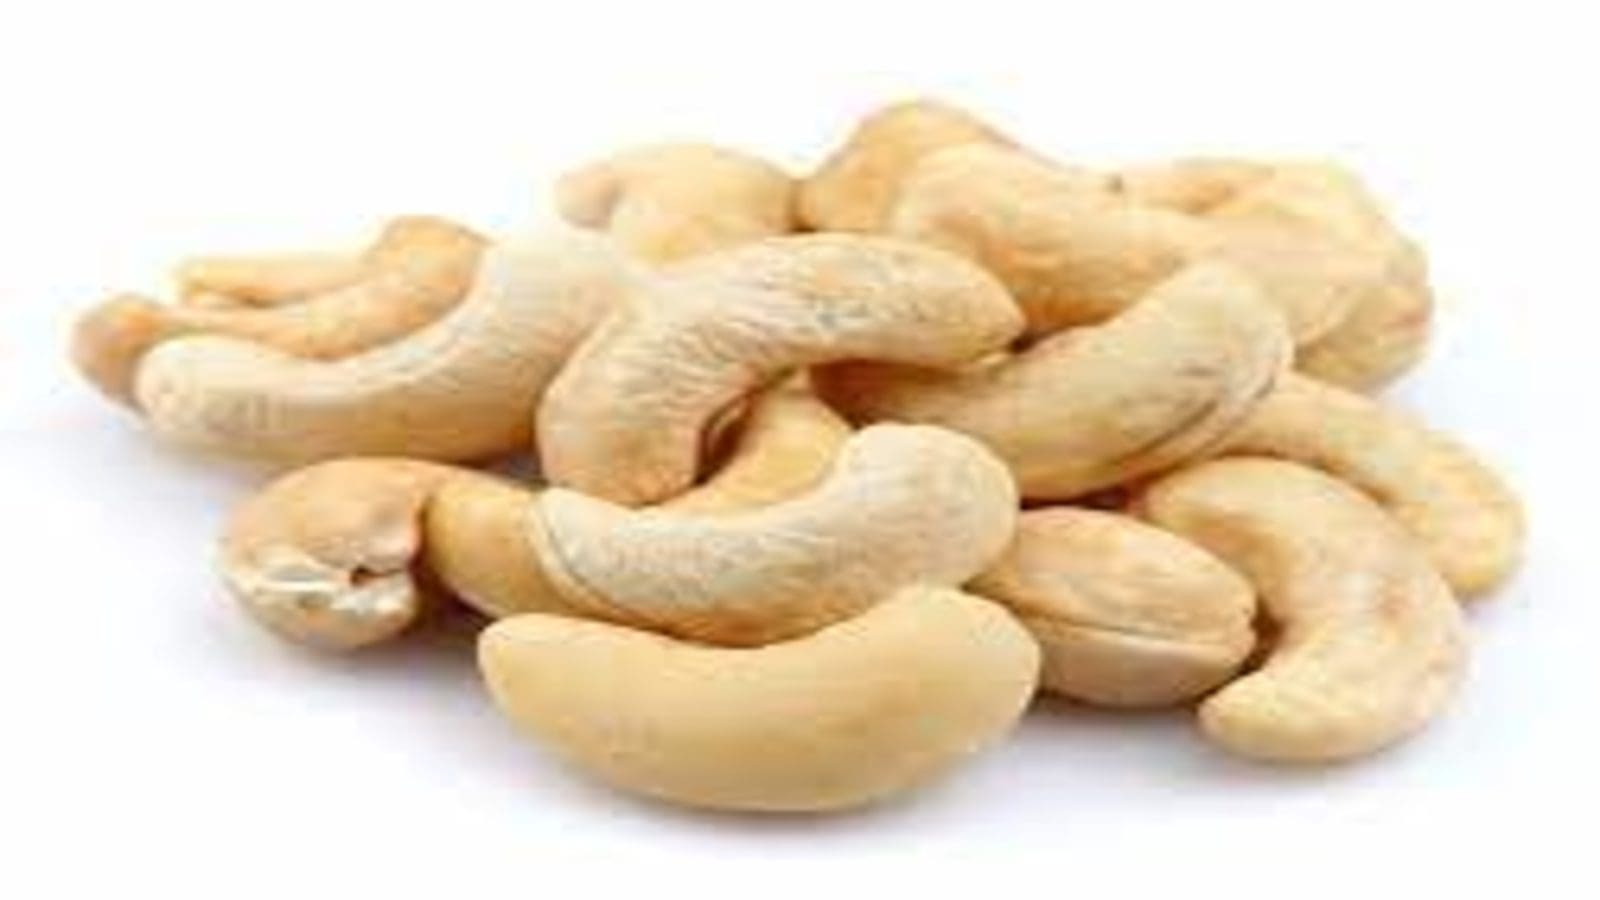 Ghana Commodity Exchange plans to start  trading cashew nuts in the quest to bolster the industry